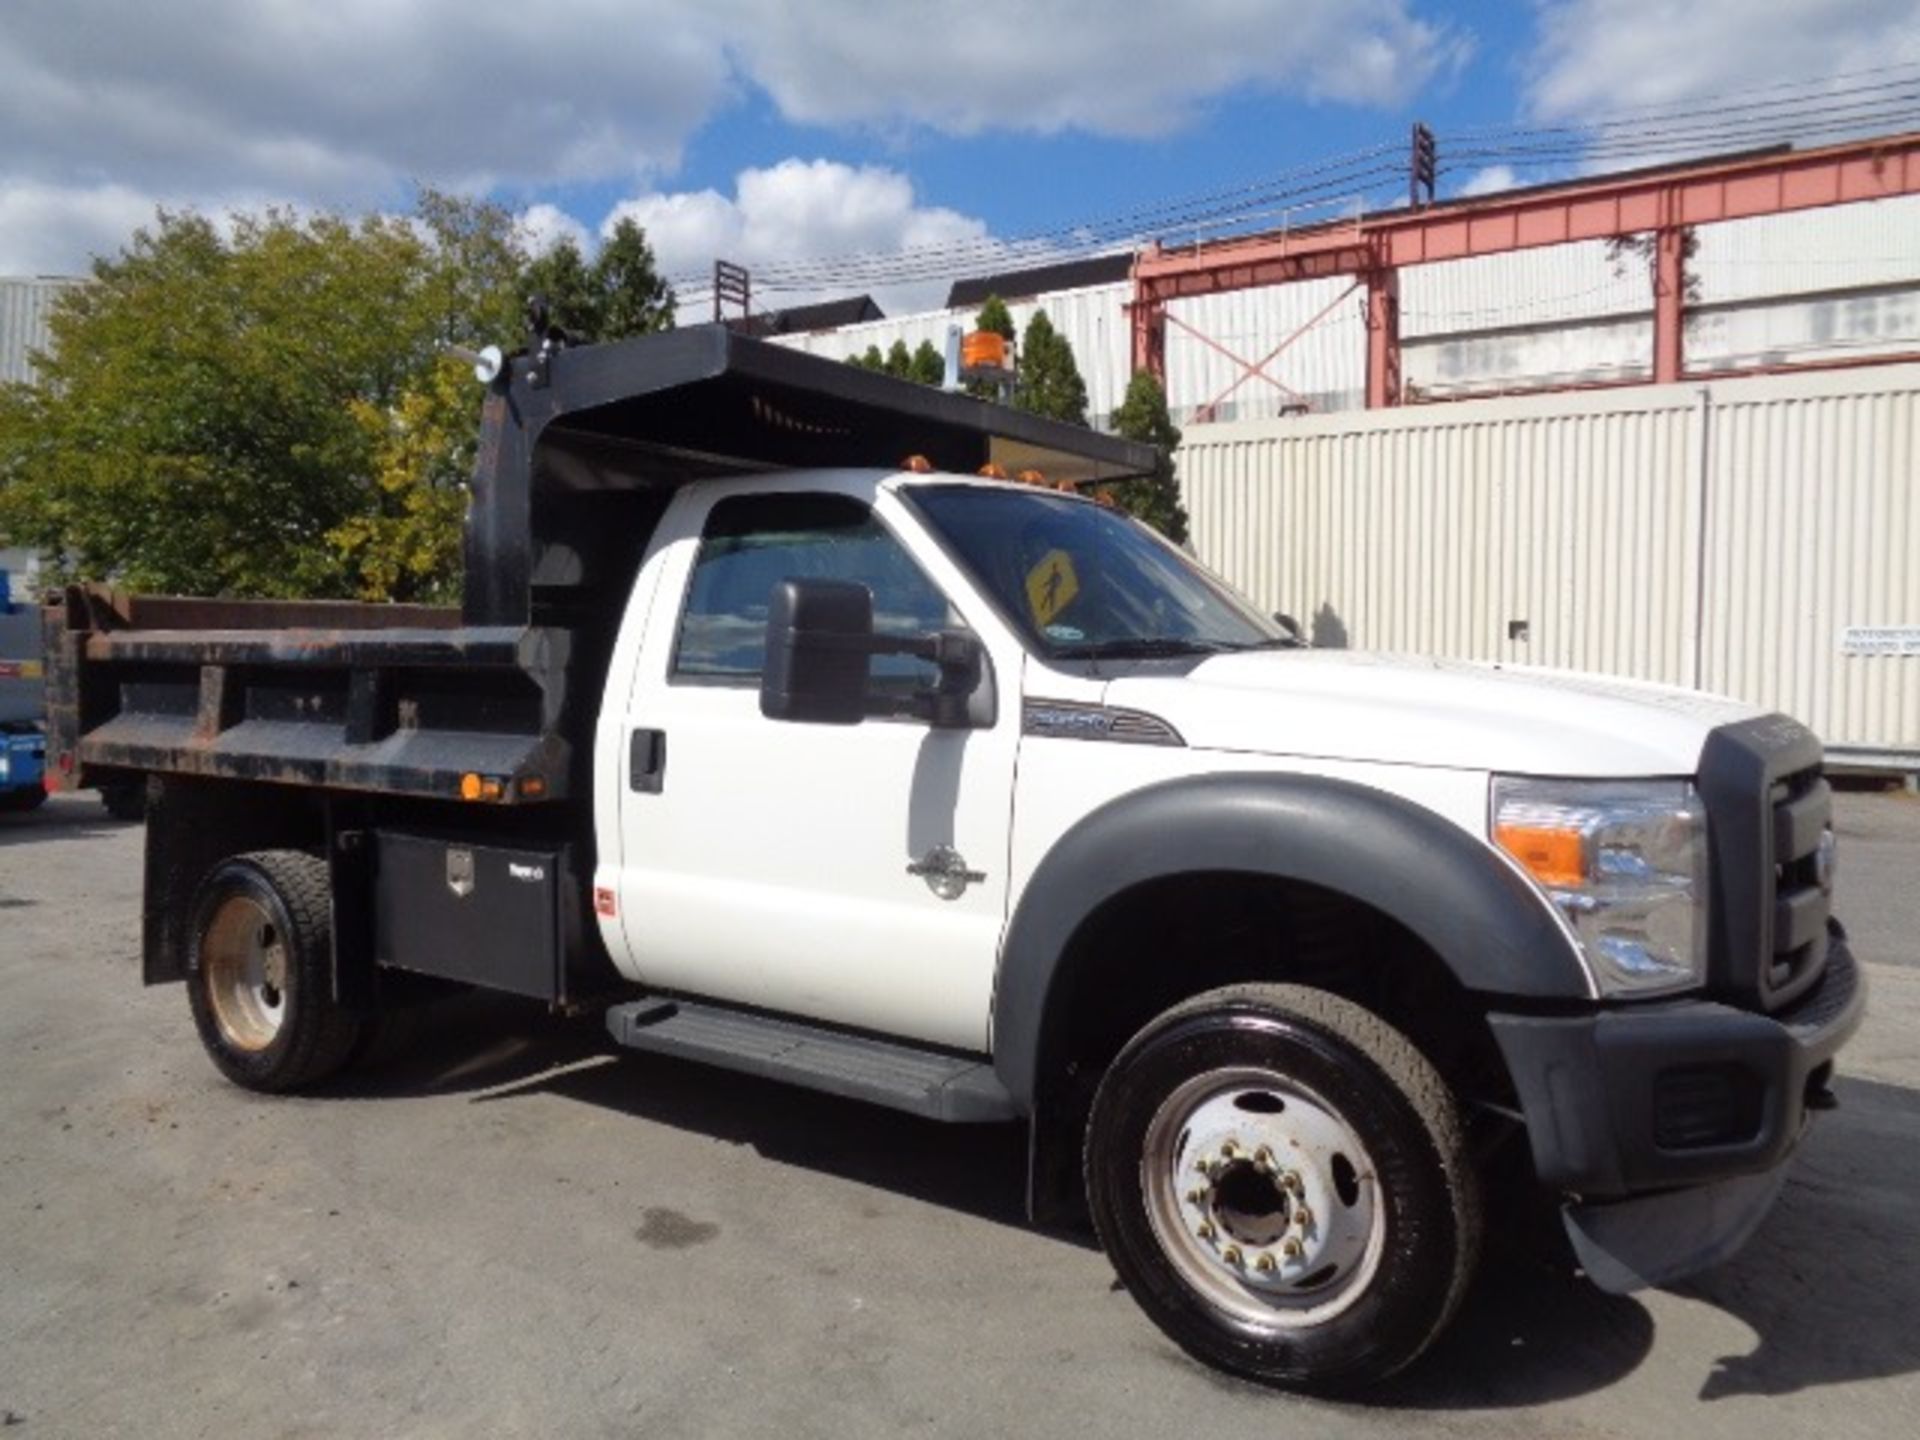 2012 Ford F550 Dump Truck - Image 4 of 19